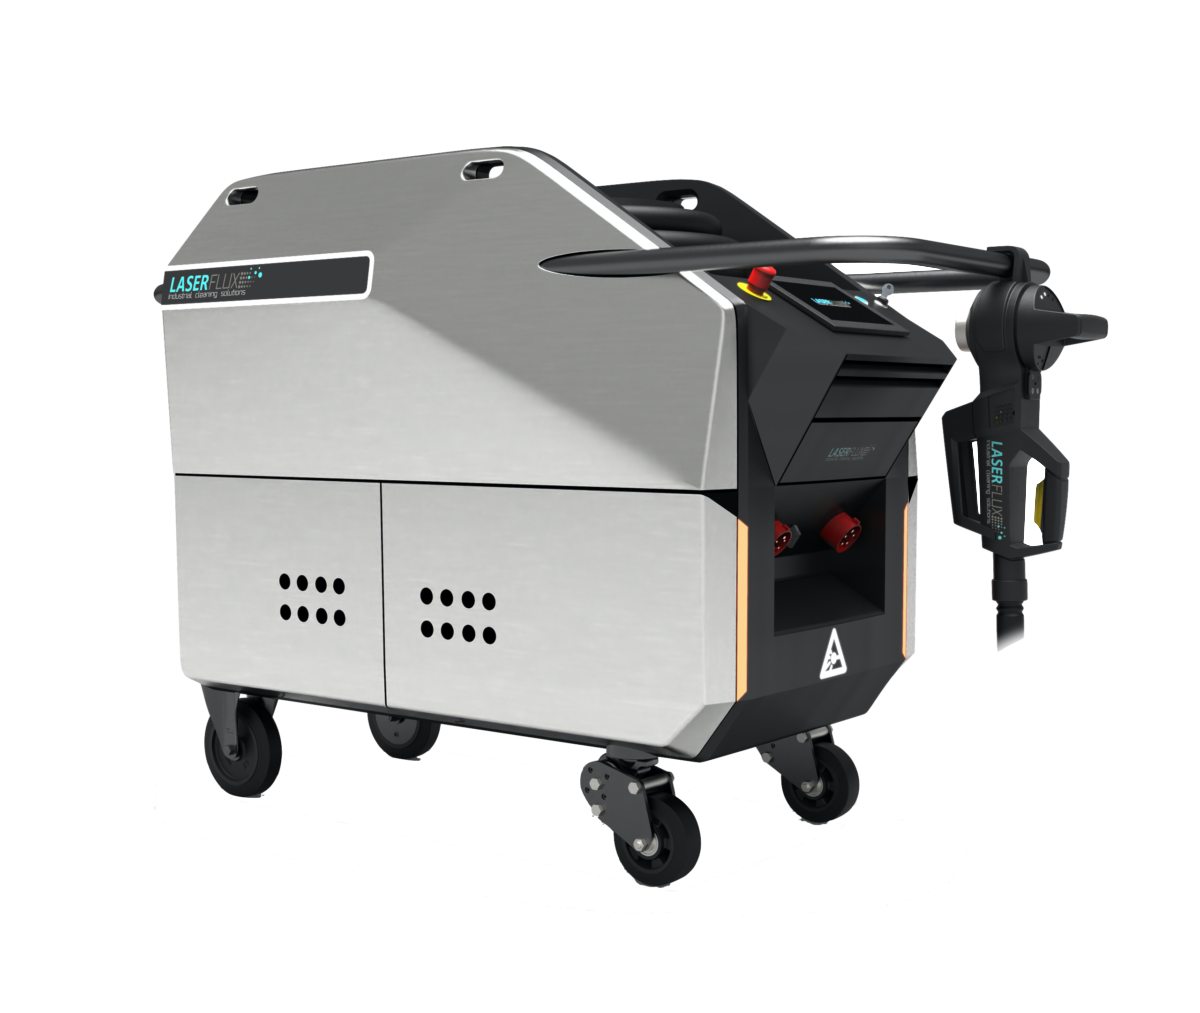 Perfect Laser-laser cleaning Machine,laser rust removal machine